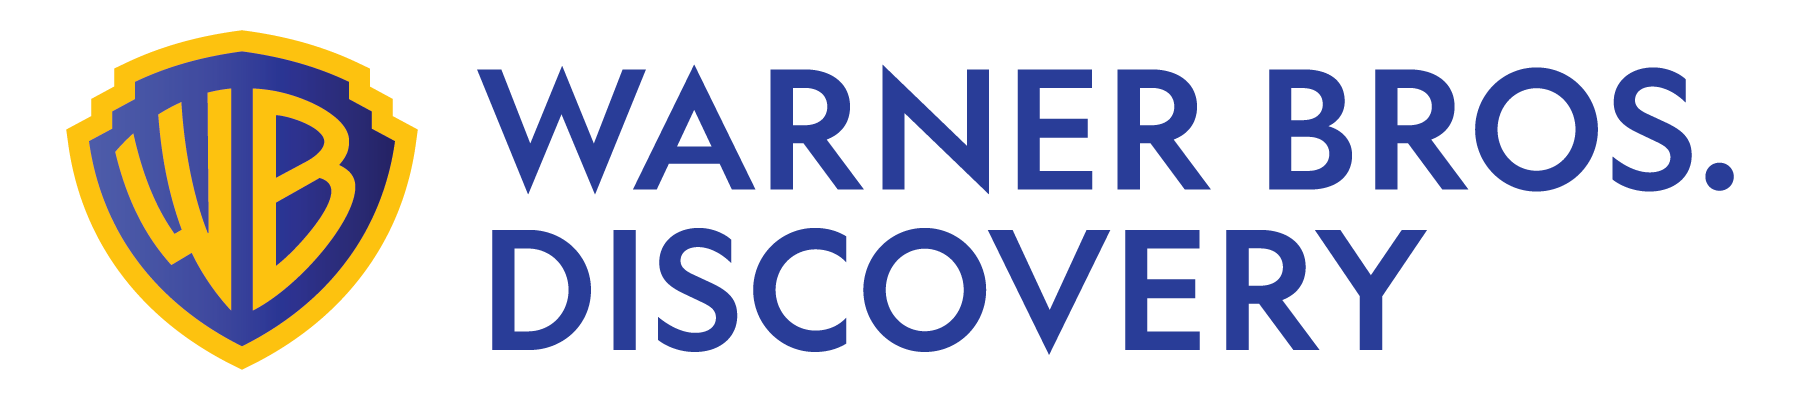 Warner Bros. Discovery logo with blue text